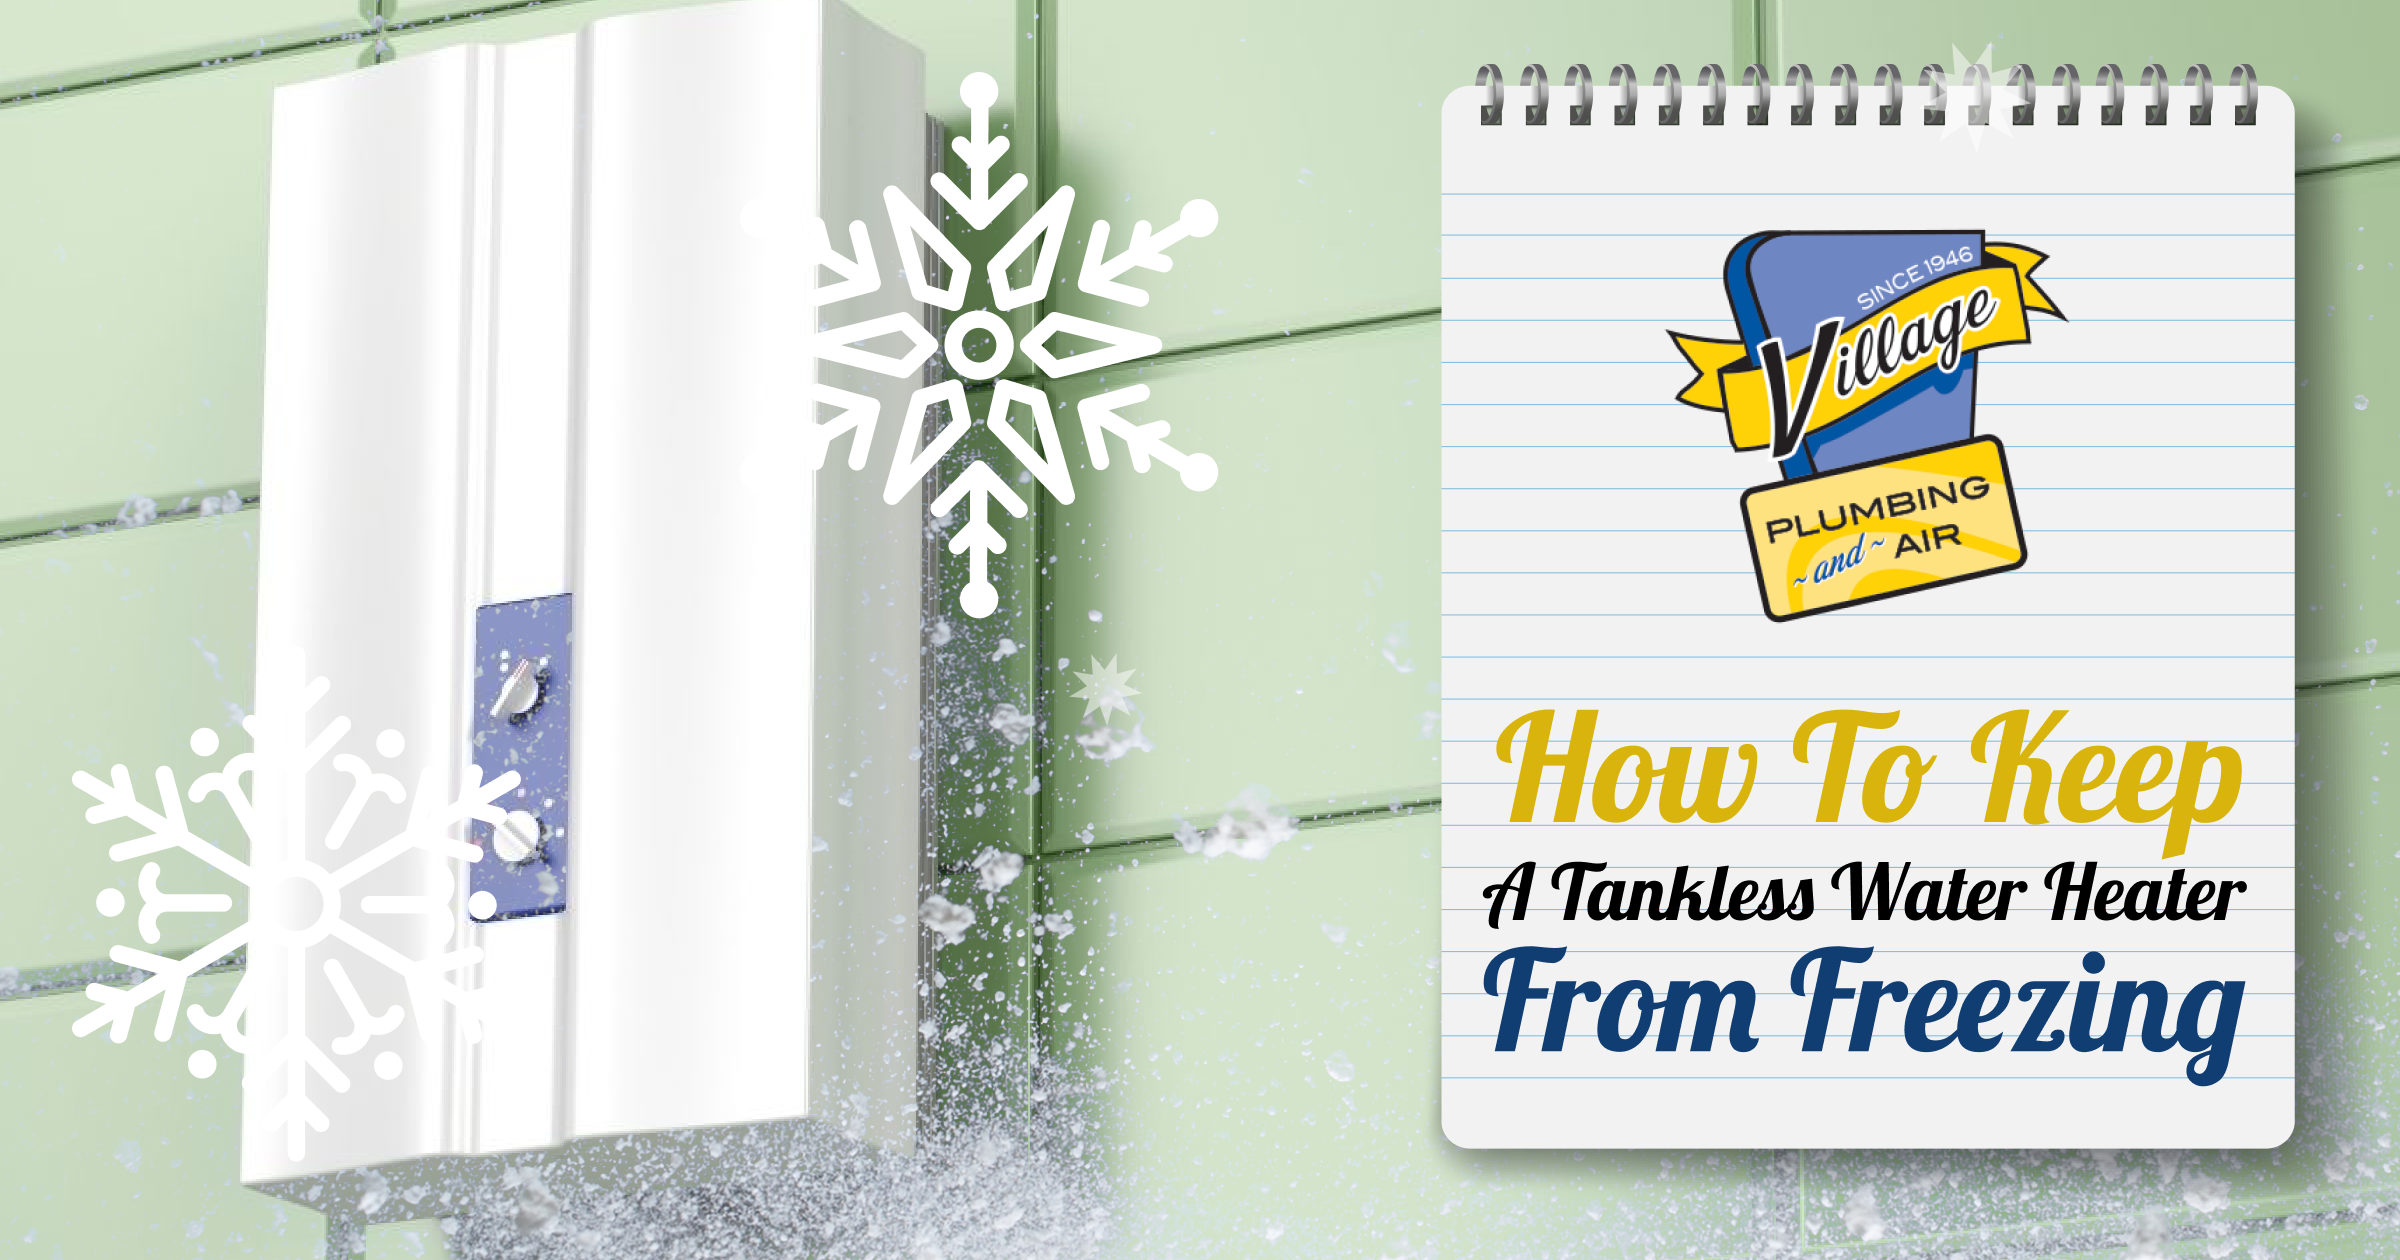 How to keep a tankless water heater from freezing